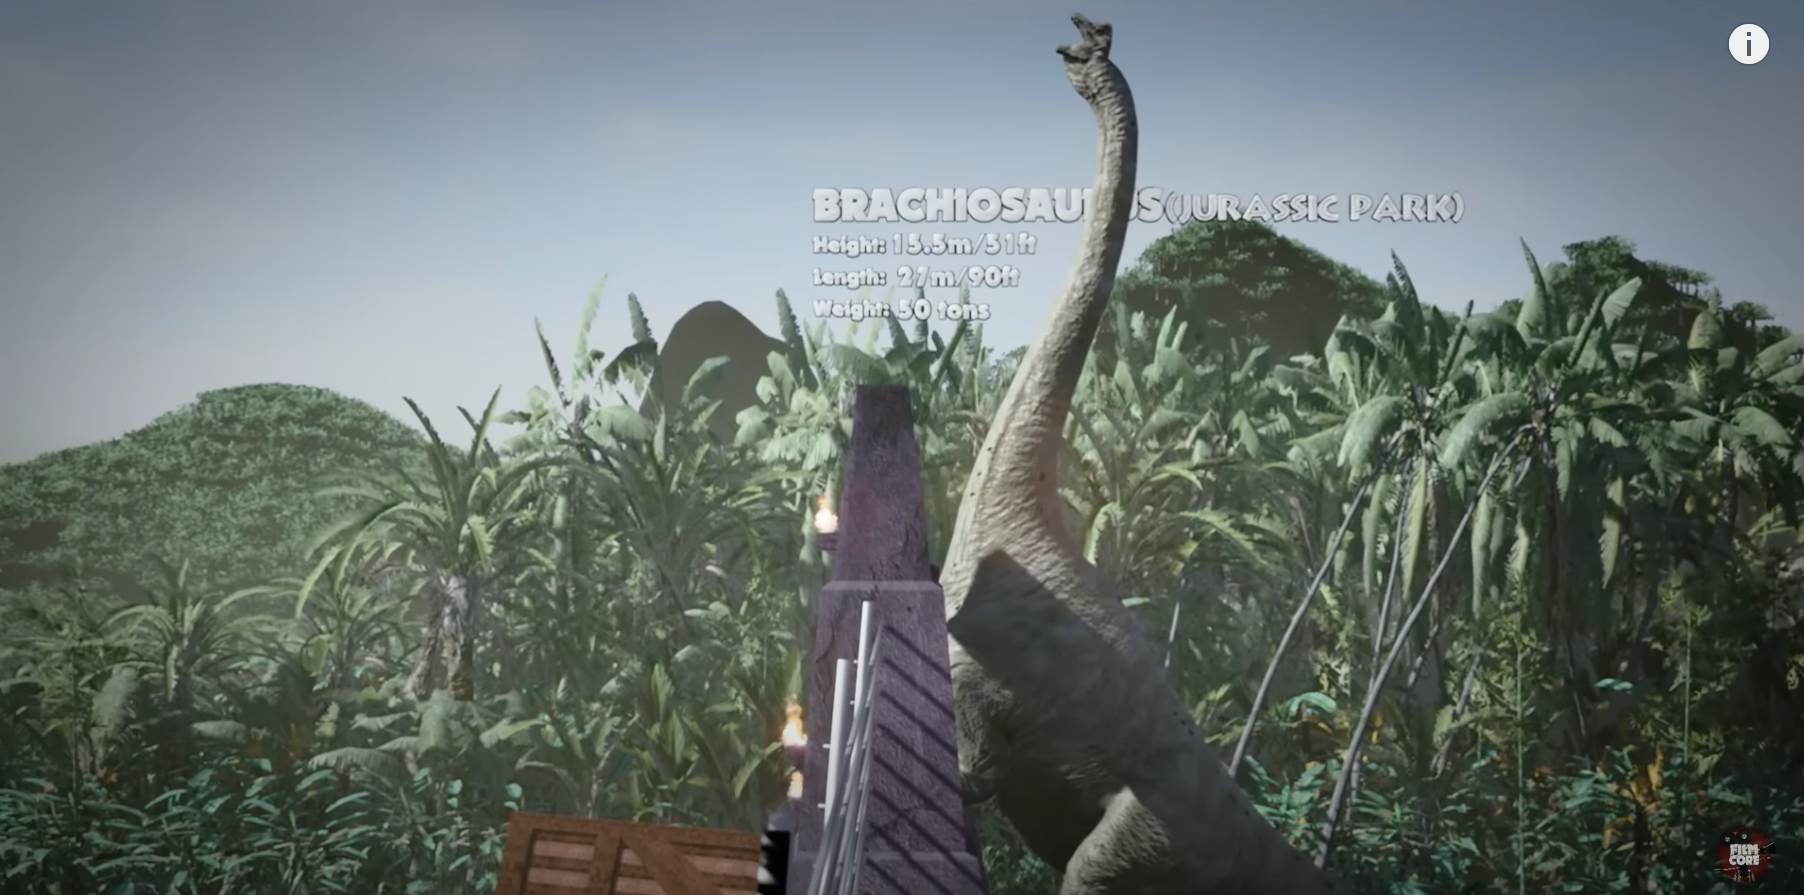 Screengrab of a size comparison vide of dinosaurs shown in the Jurassic Park movies. Shows a Brachiosaurus mid-scream. Height: 51 ft. Length: 90 ft. Weight: 50 tonnes. 